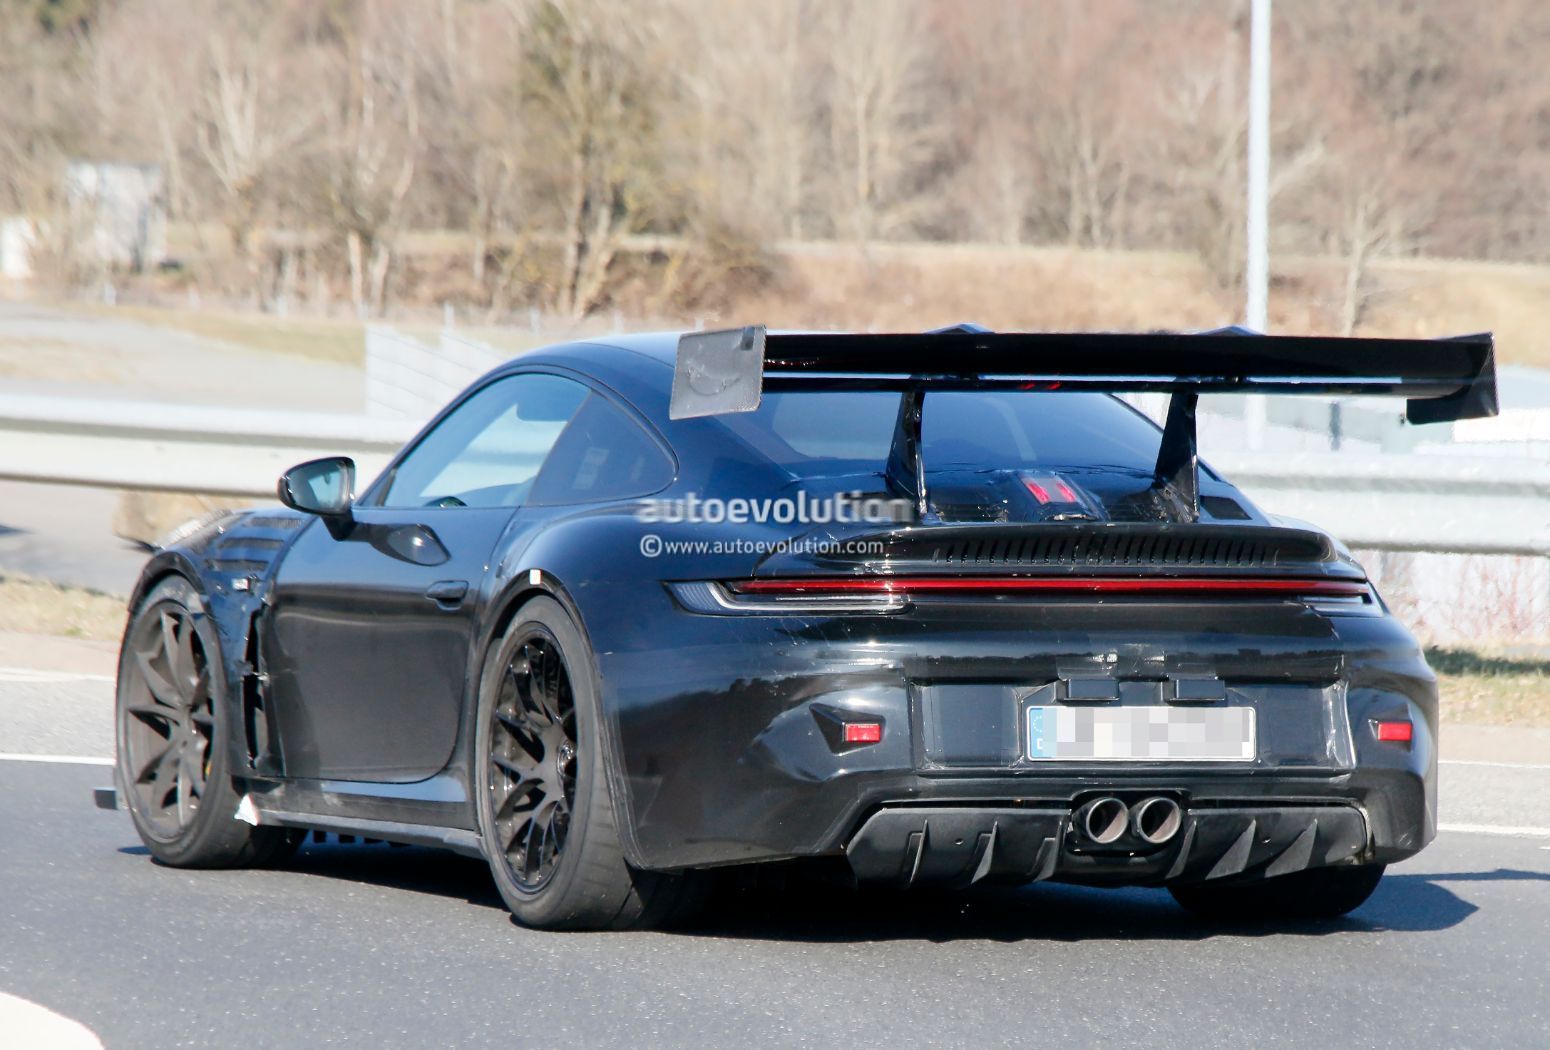 992 Porsche 911 GT3 RS Shows Massive Rear Wing Featuring Active Aero.